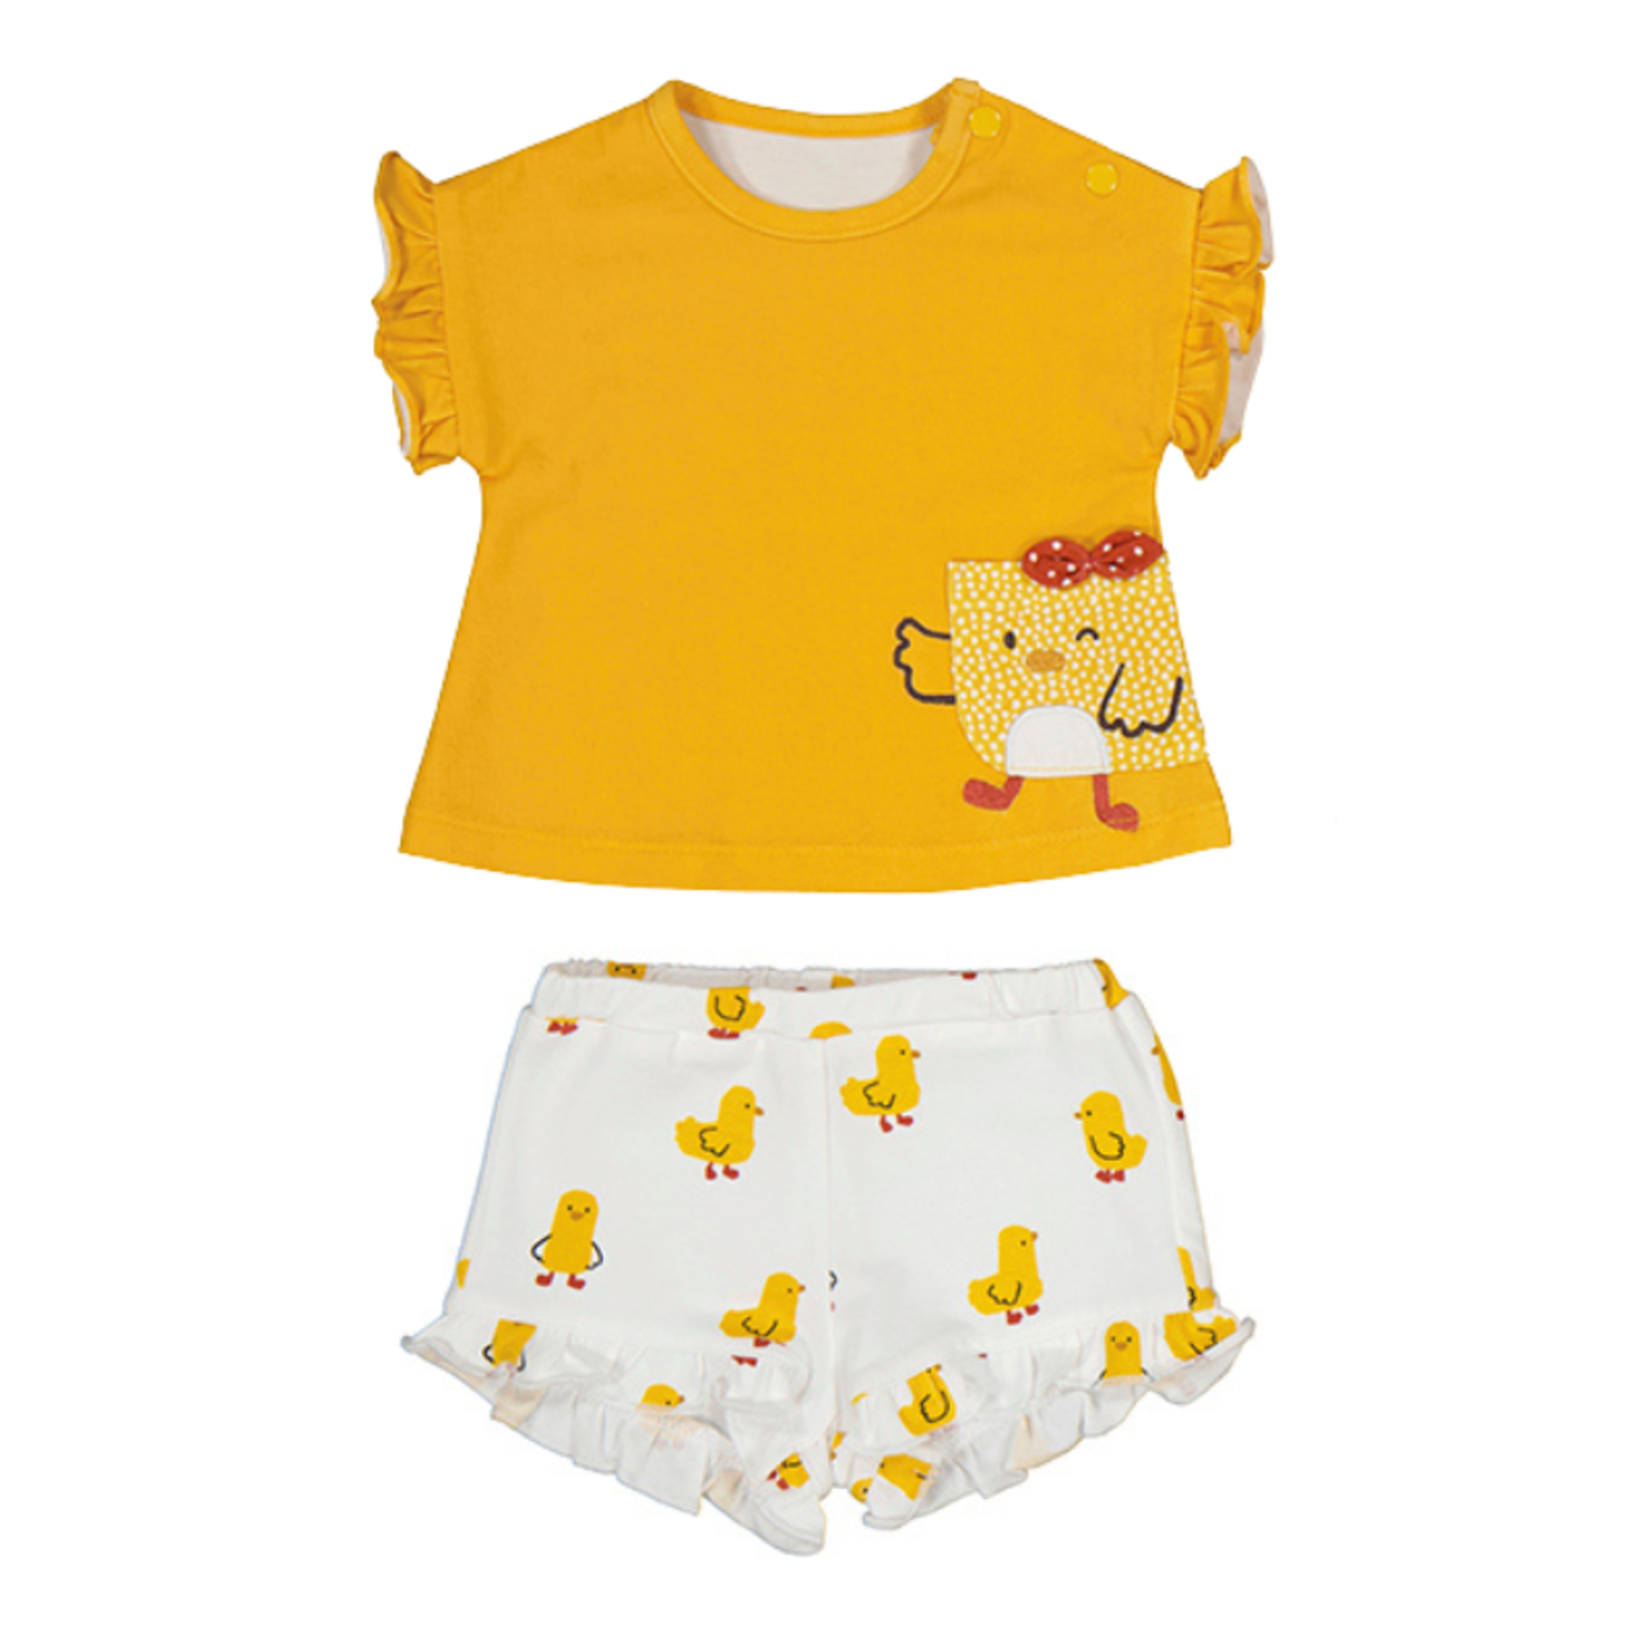 Mayoral Mayoral 2pc Ducky Shirt w/ AOP Ducky Shorts Corn